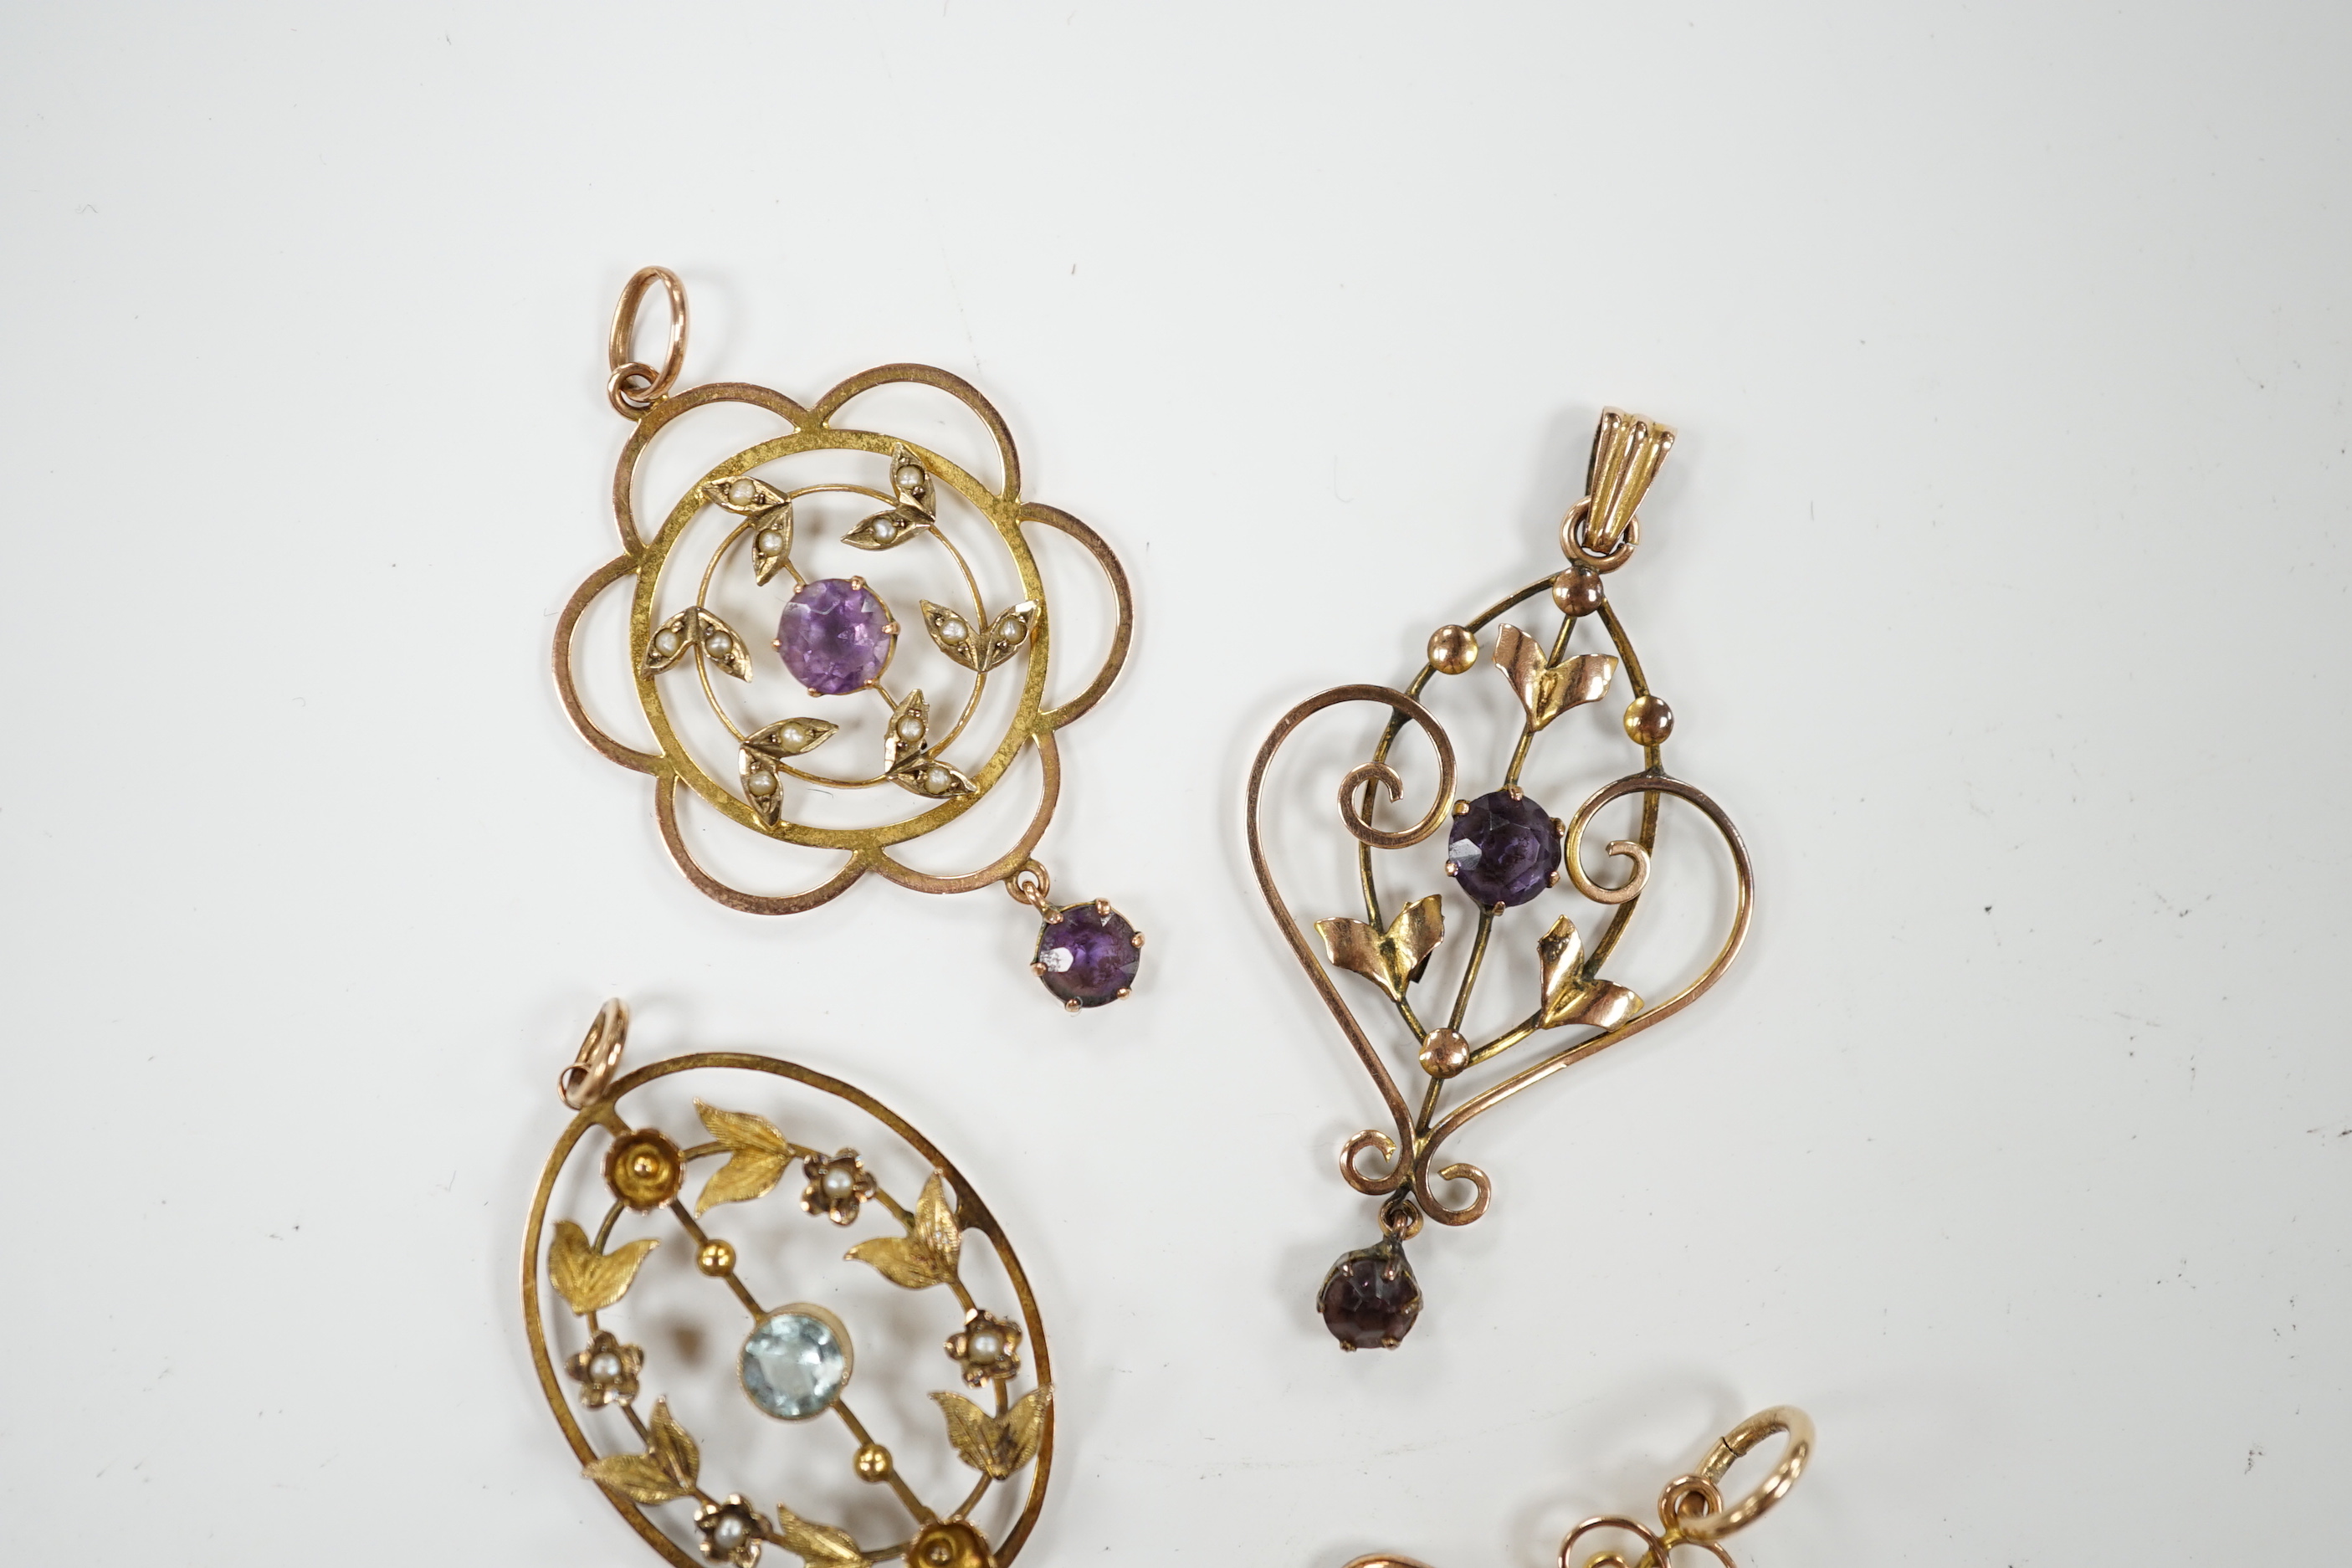 Three assorted early 20th century 9ct and gem set pendants, one other similar yellow metal and gem set pendant, largest, 40mm, gross weight 7.5 grams.